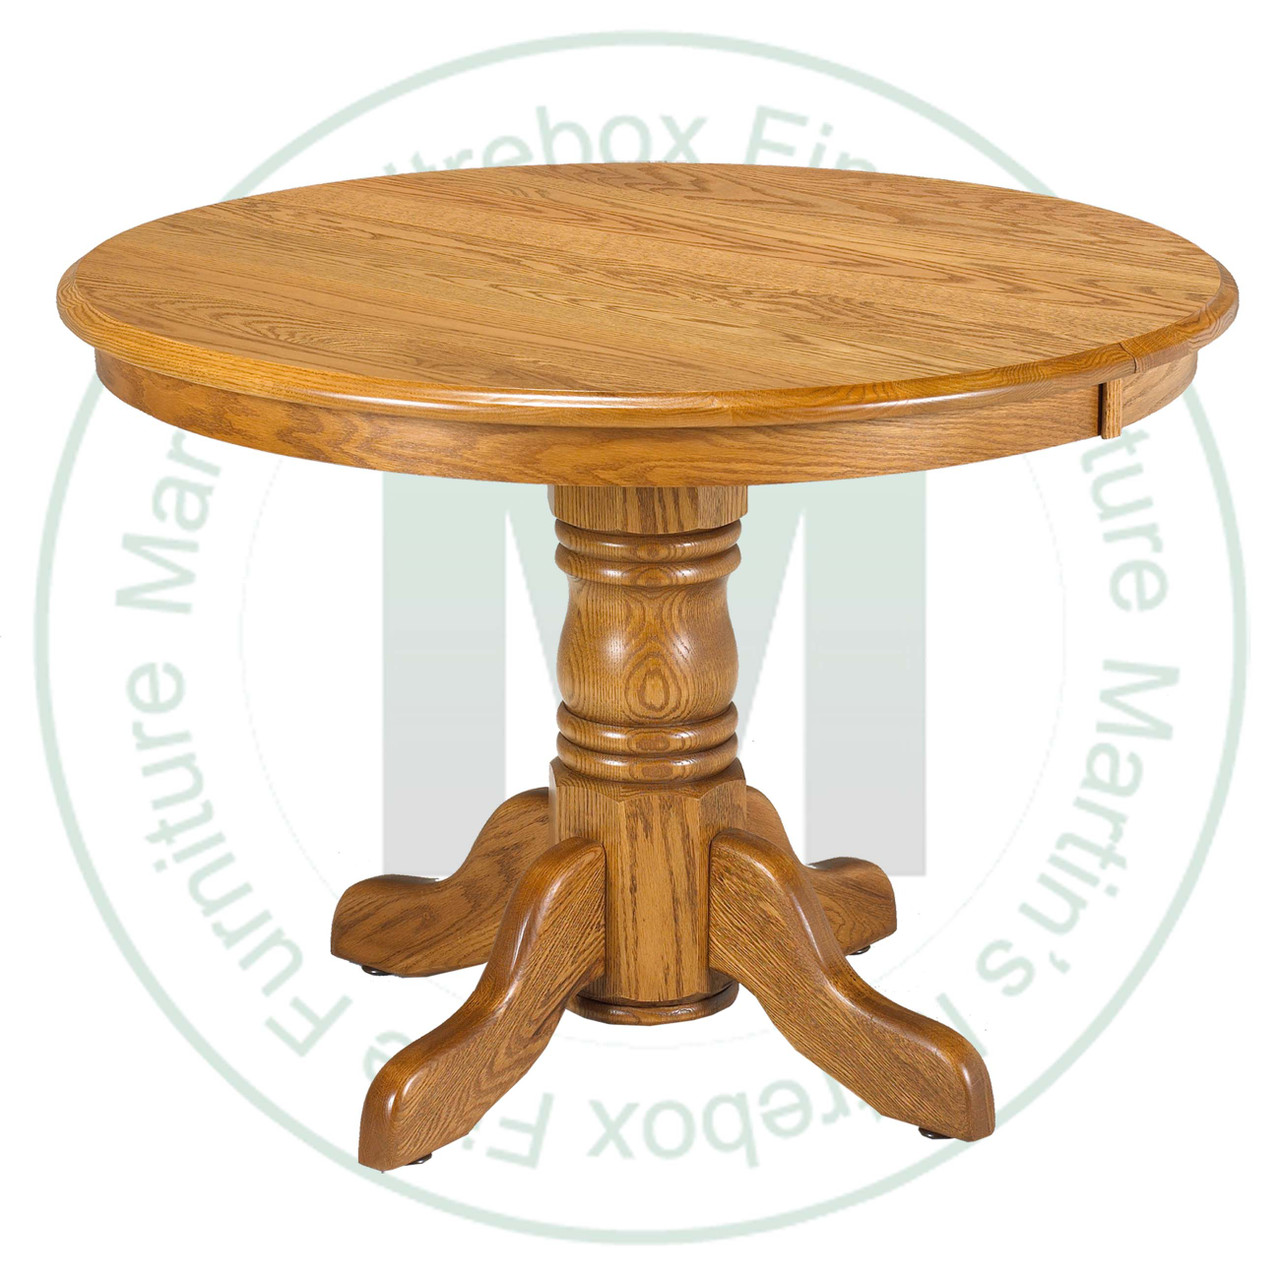 Oak Lancaster Collection Single Pedestal Table 36''D x 42''W x 30''H  Round Solid Table. Table Has 1.25'' Thick Top